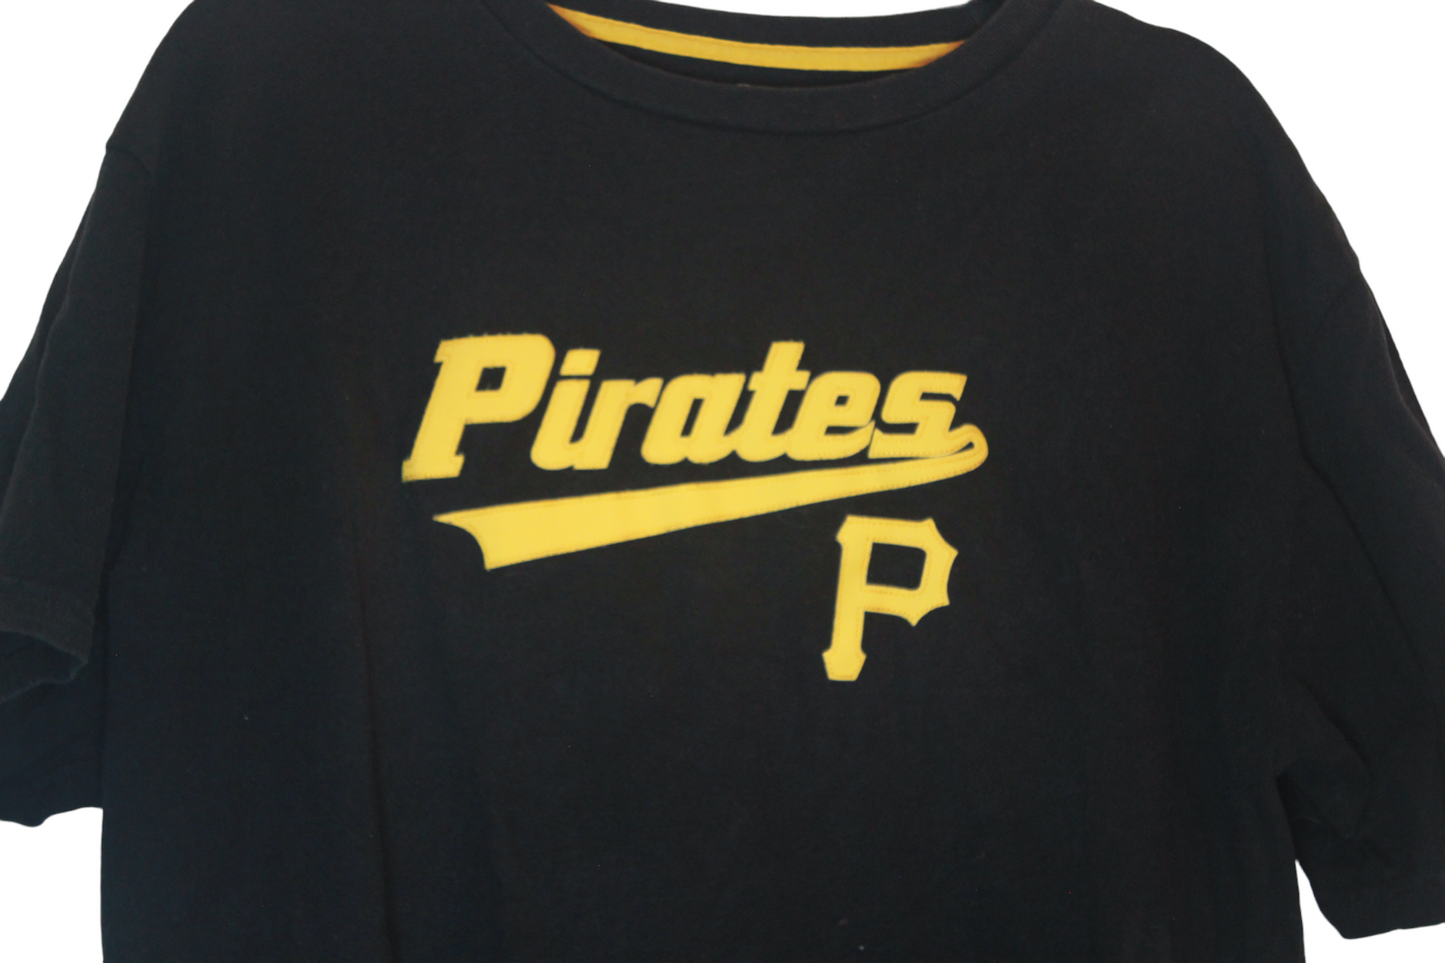 Pittsburgh Pirates Stitched Tee